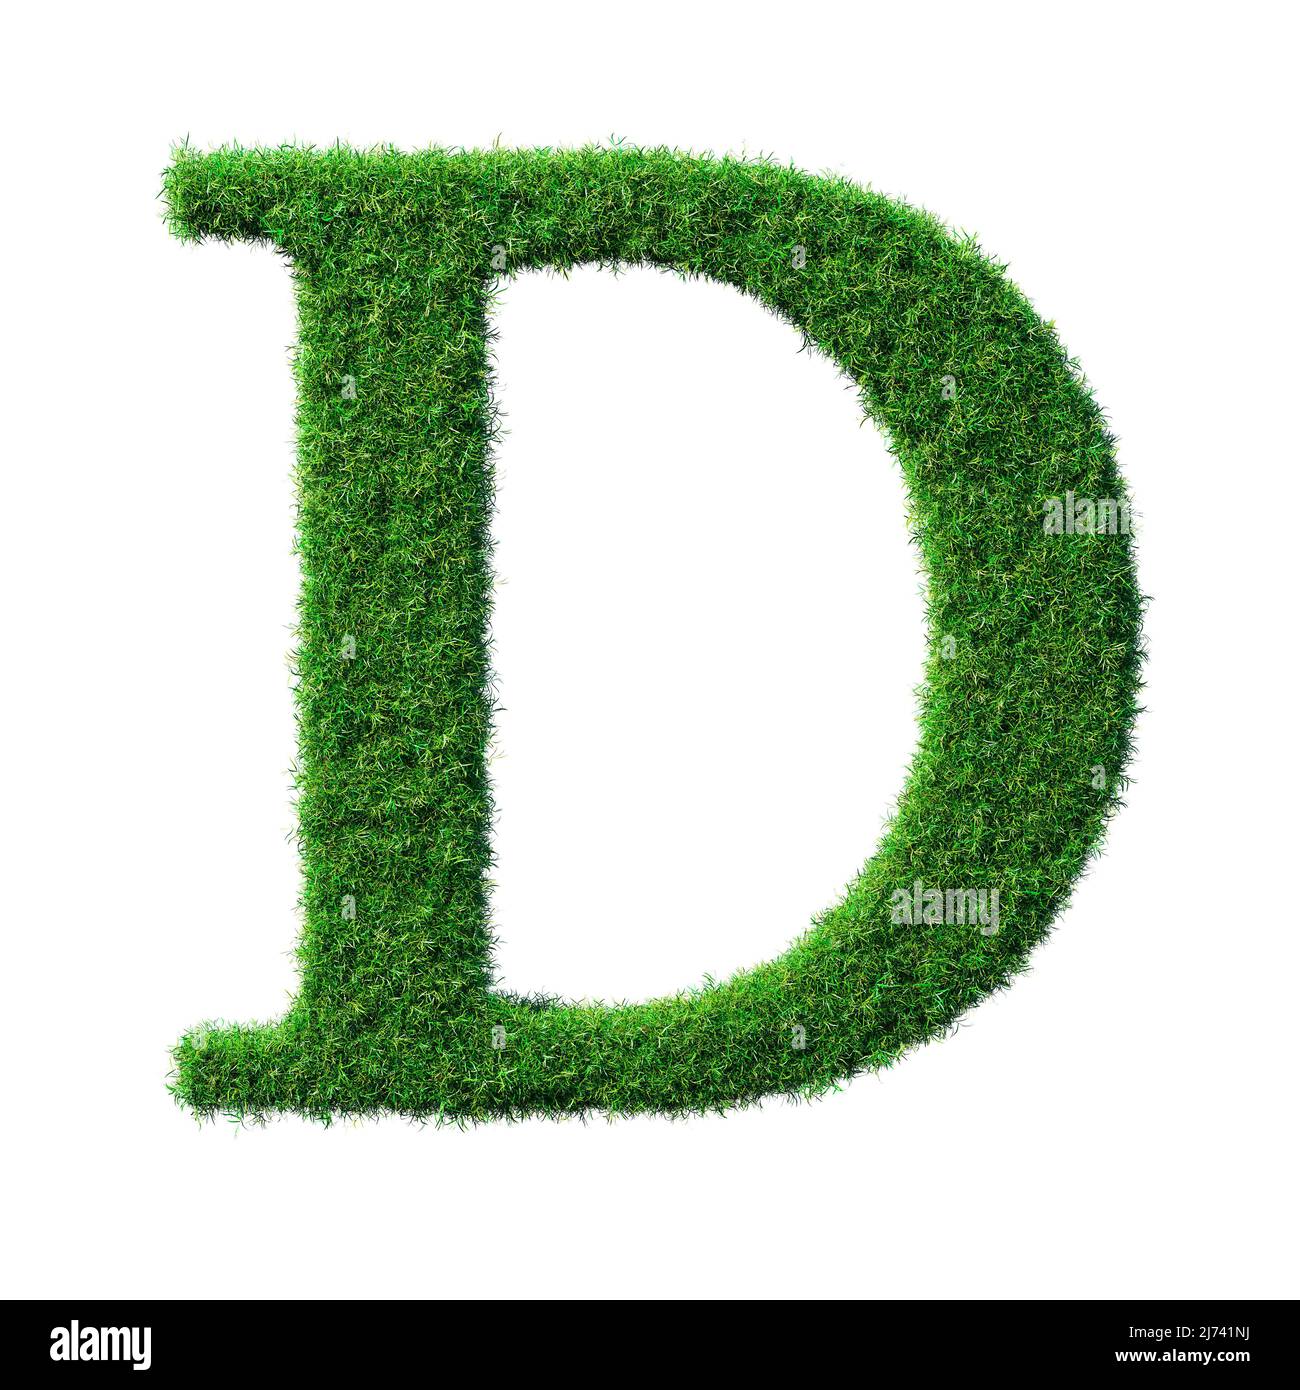 Letter D made of green grass isolated on white Background 3D-Illustration - Part of a series Stock Photo